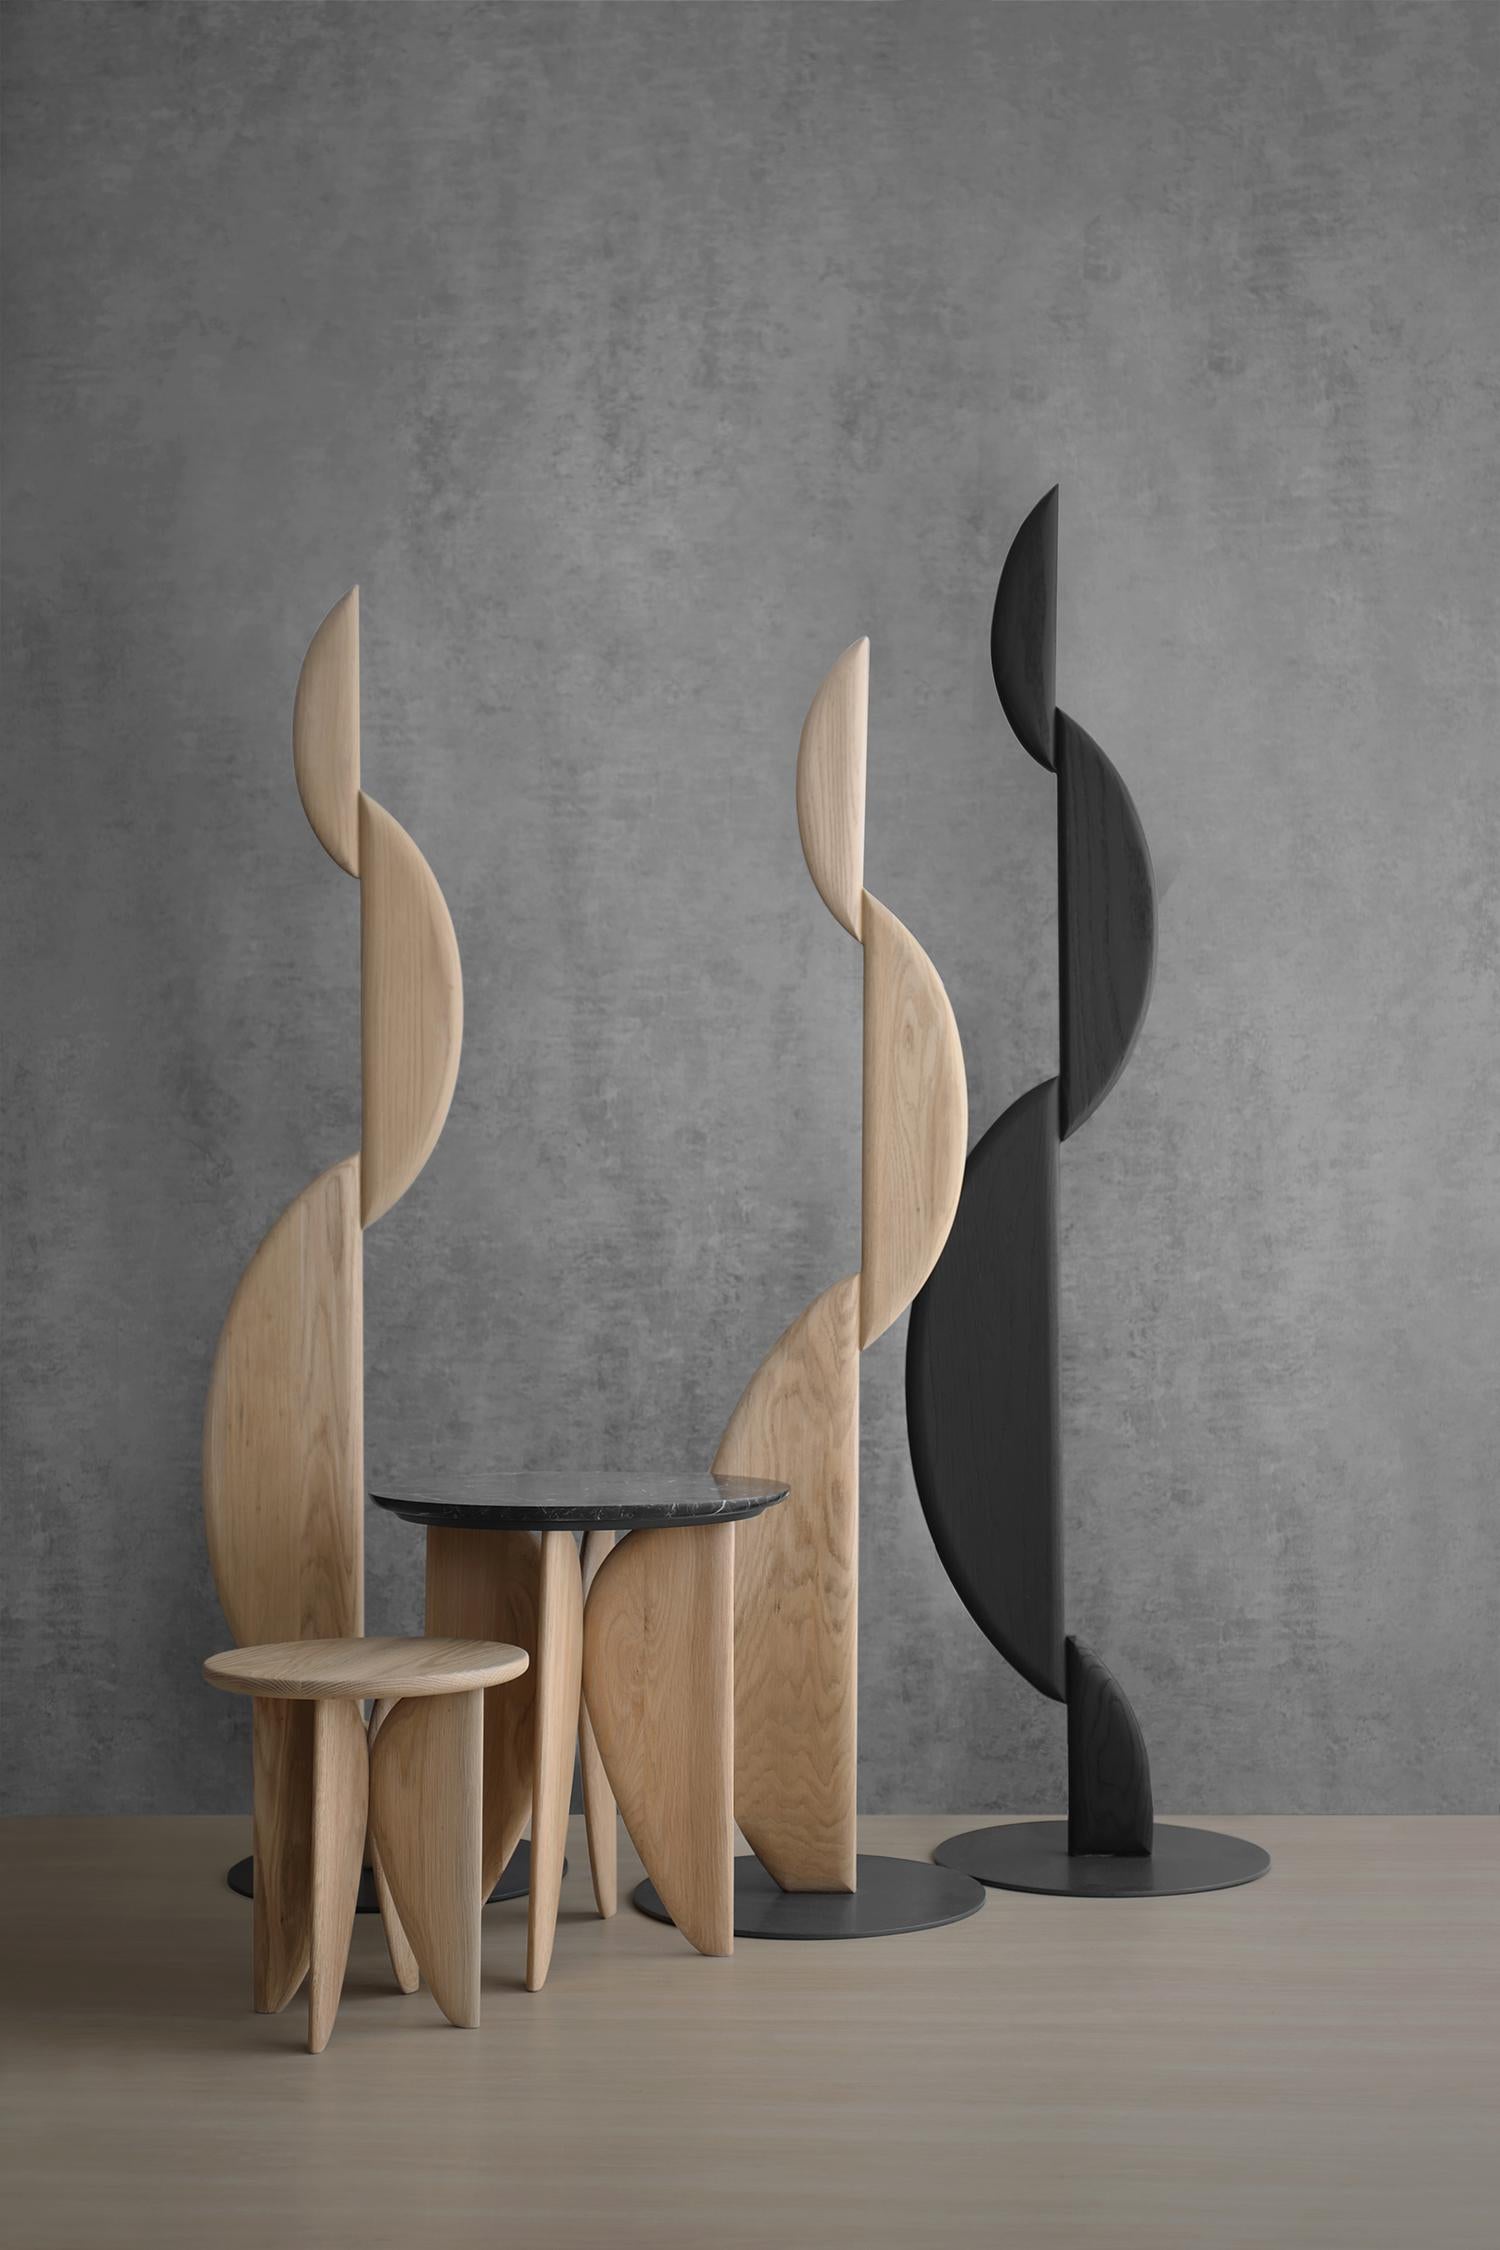 The II- Segunda Sculpture is part of Noviembre collection, which offers a compelling range of furniture, inviting exploration of form, function, and the serene lines that define each piece. Inspired by Constantin Brancusi's artistic philosophy, the